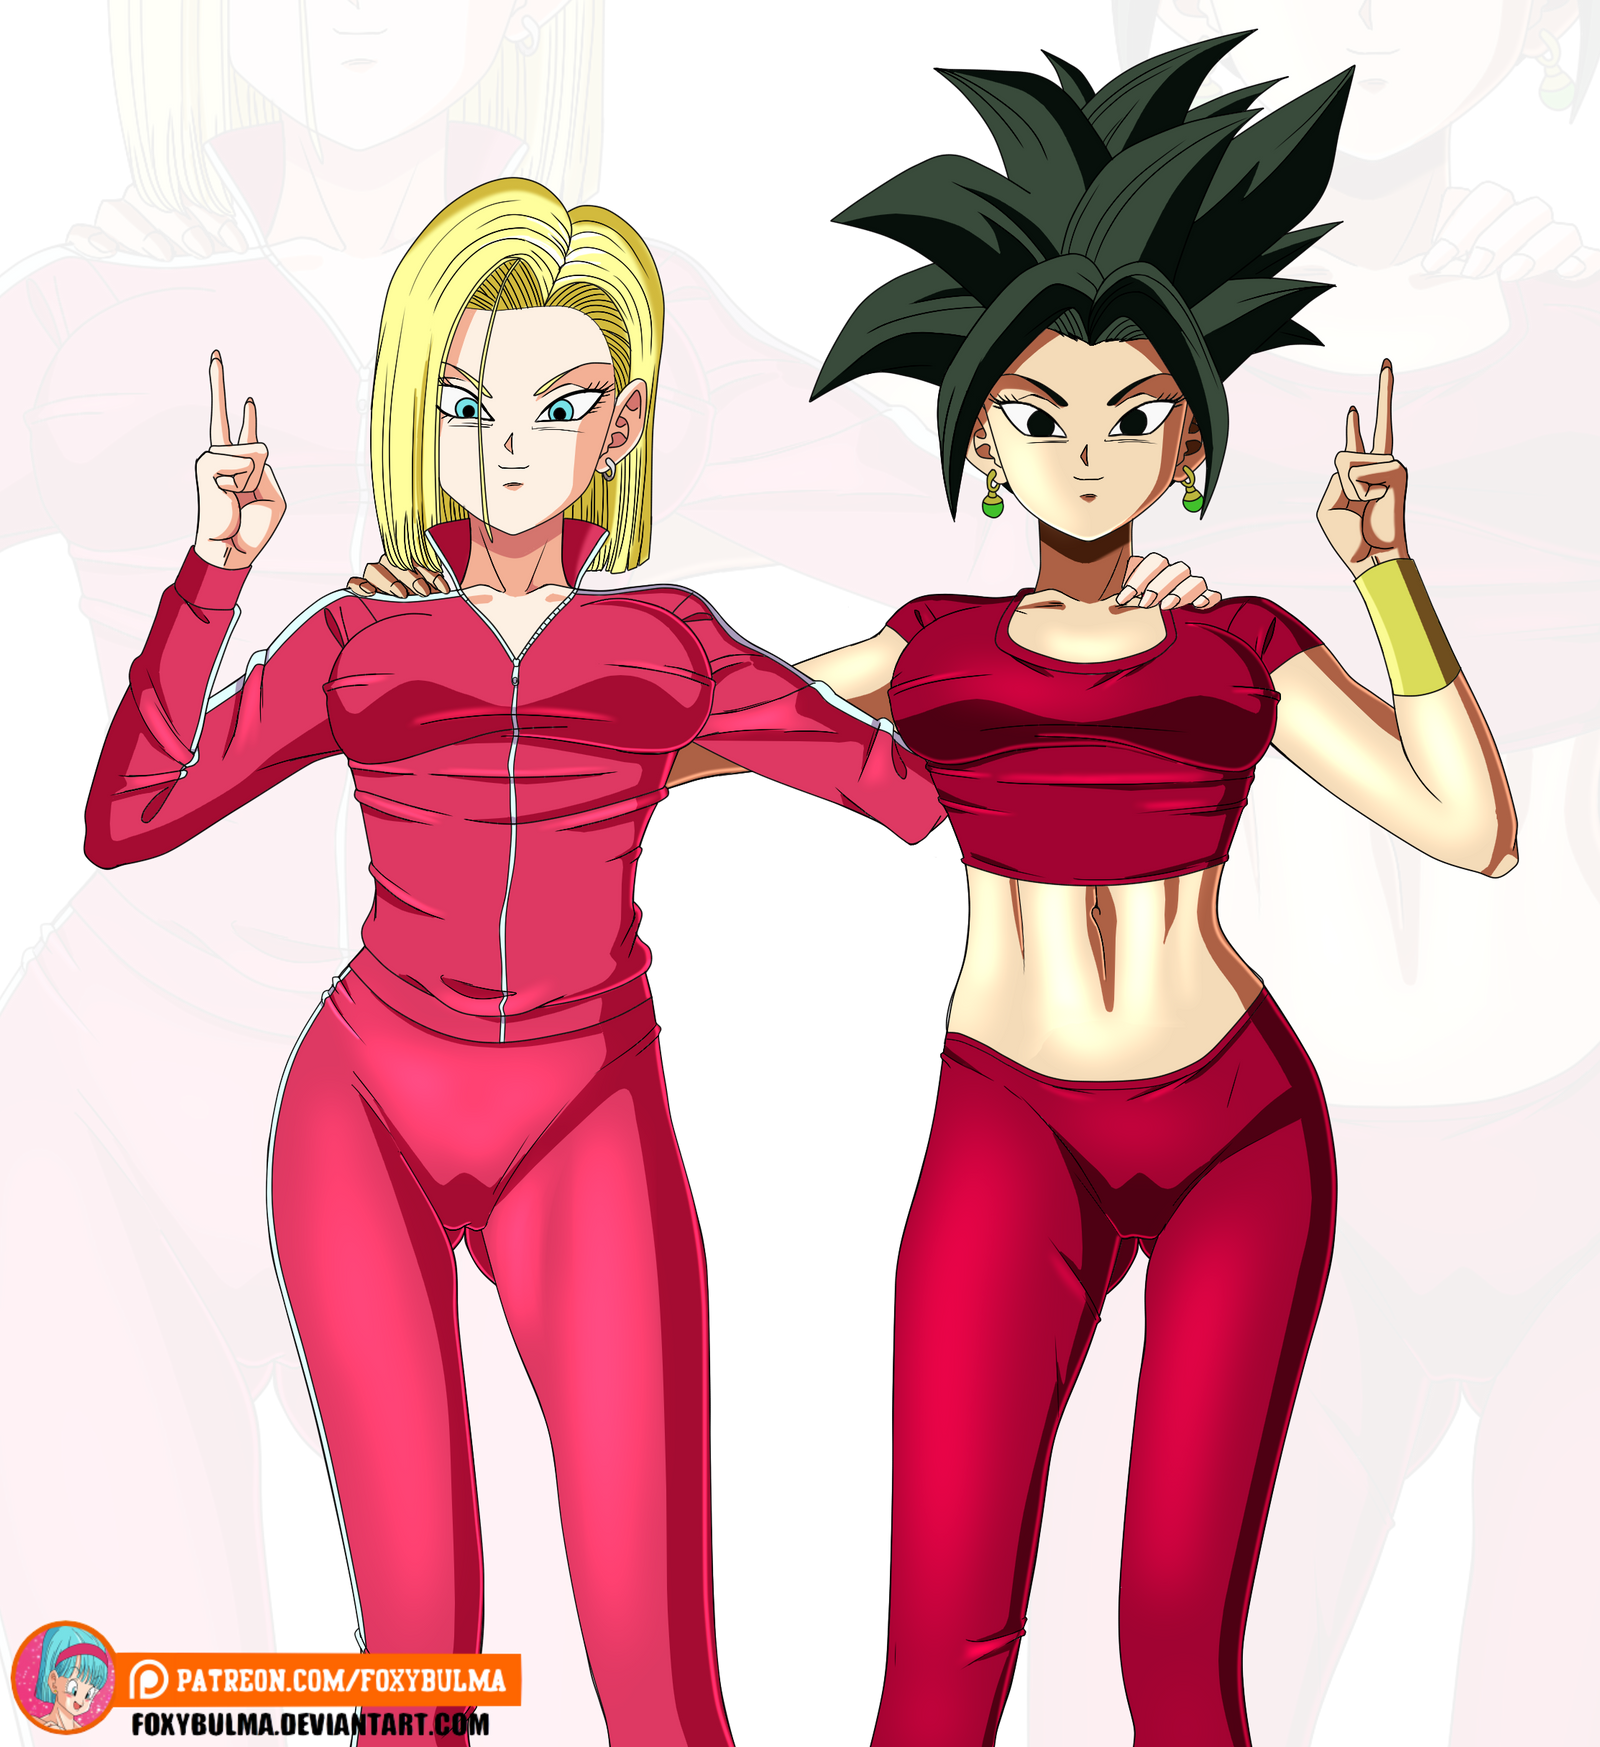 Android 18 And Kefla Posing For The Cameras By FoxyBulma On DeviantArt